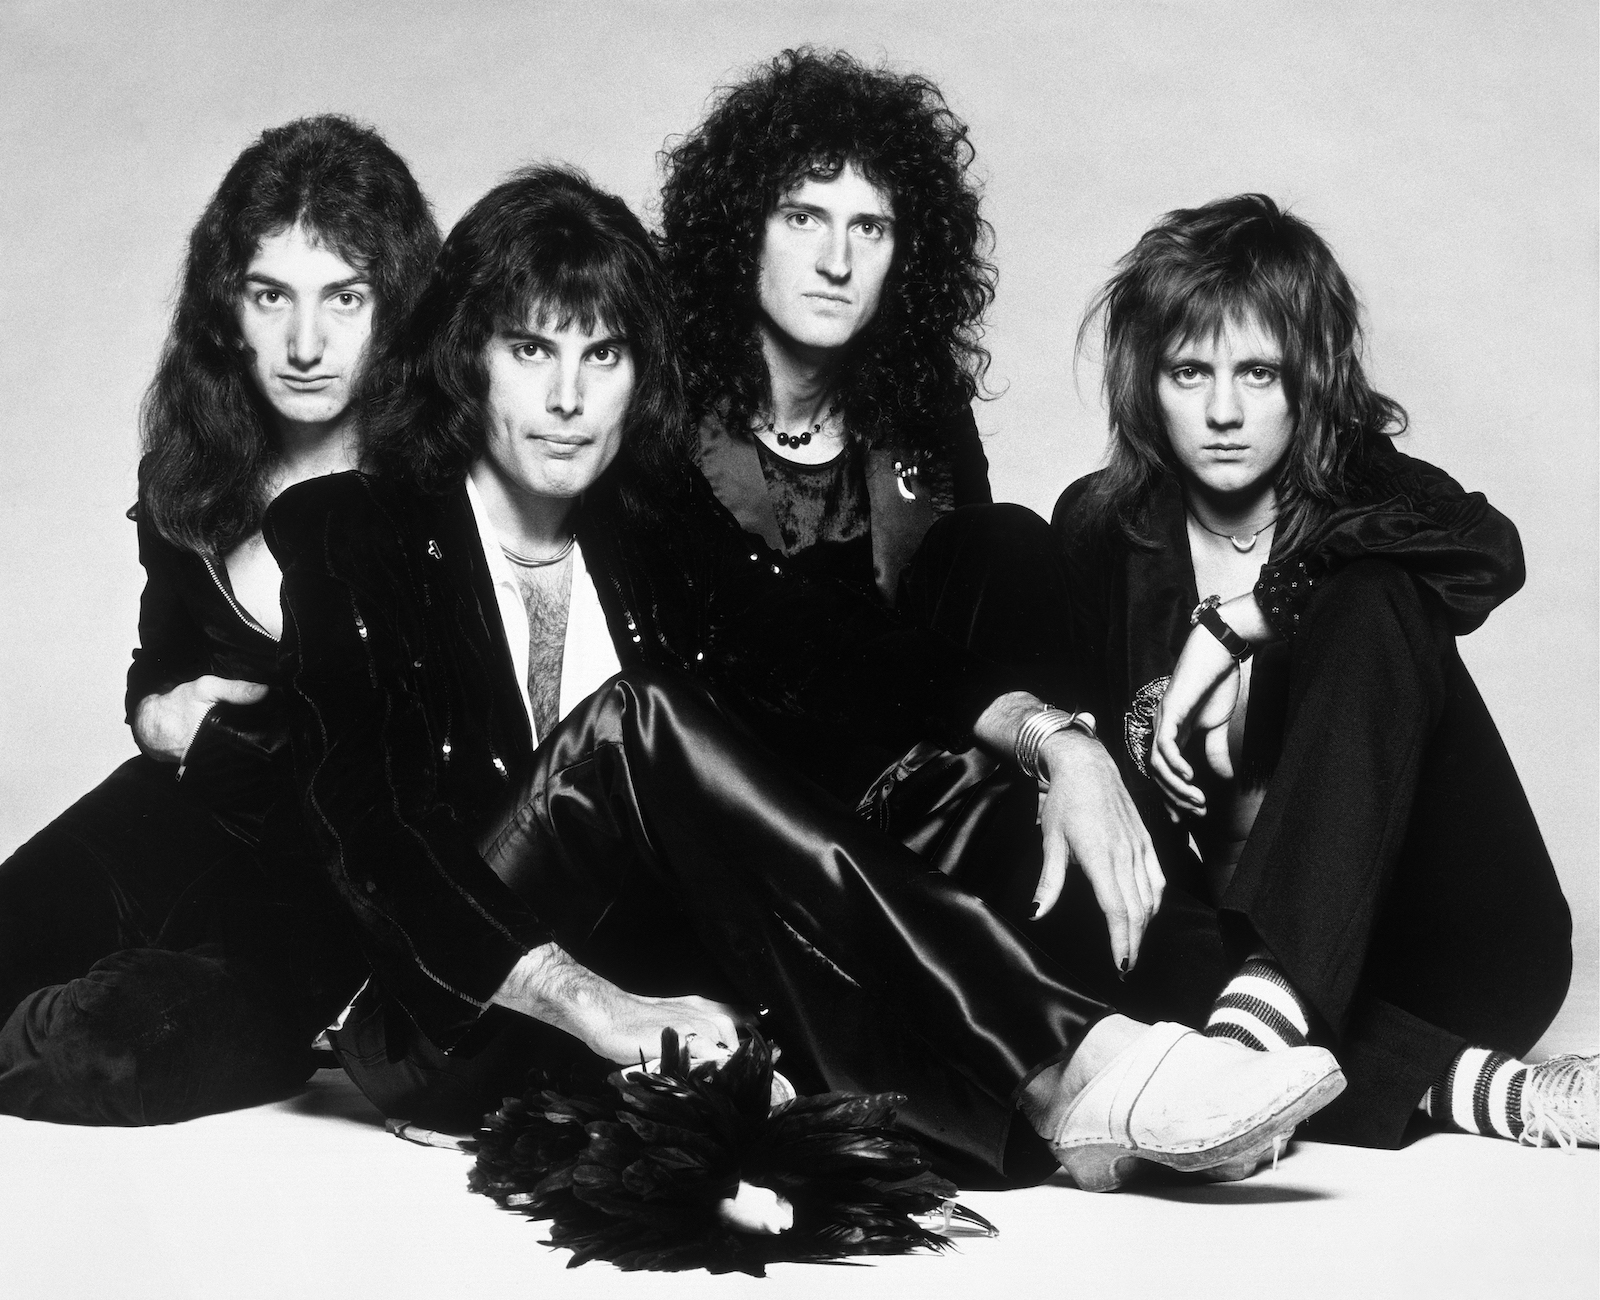 QUEEN'S ICONIC “BOHEMIAN RHAPSODY” BECOMES THE MOST-STREAMED SONG